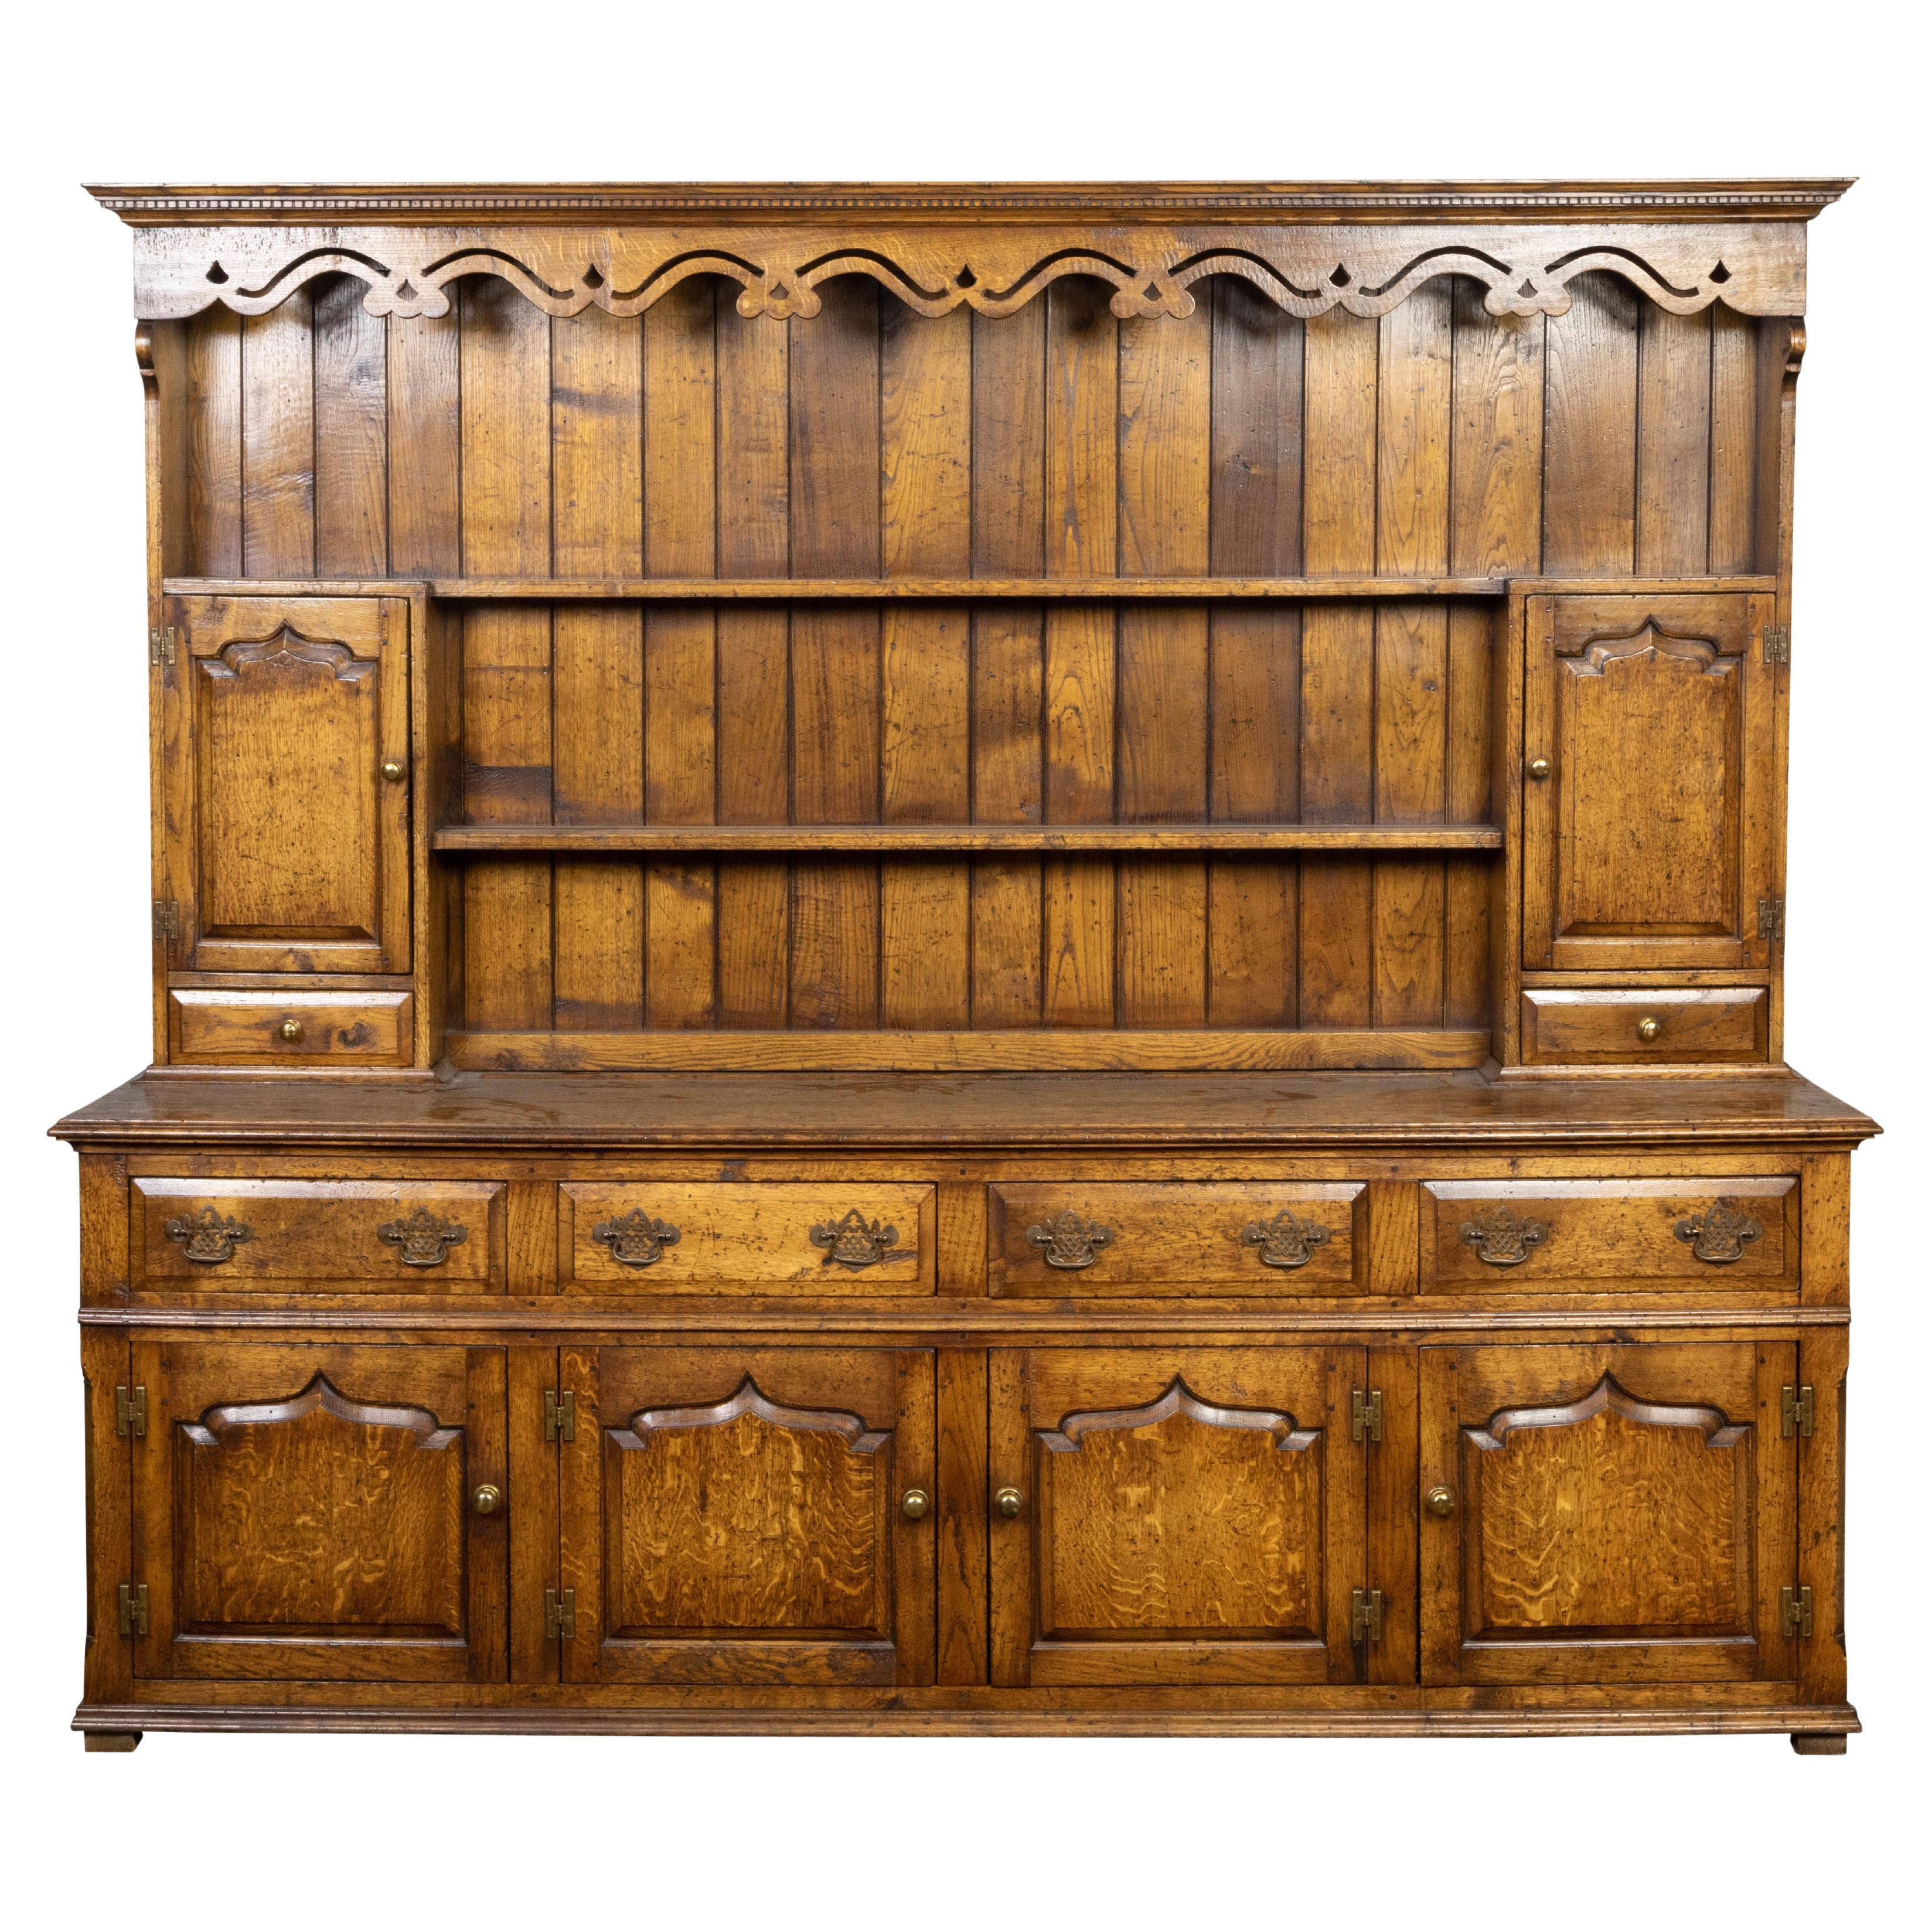 English Midcentury Oak Dresser with Carved Accents, Six Doors and Six Drawers For Sale